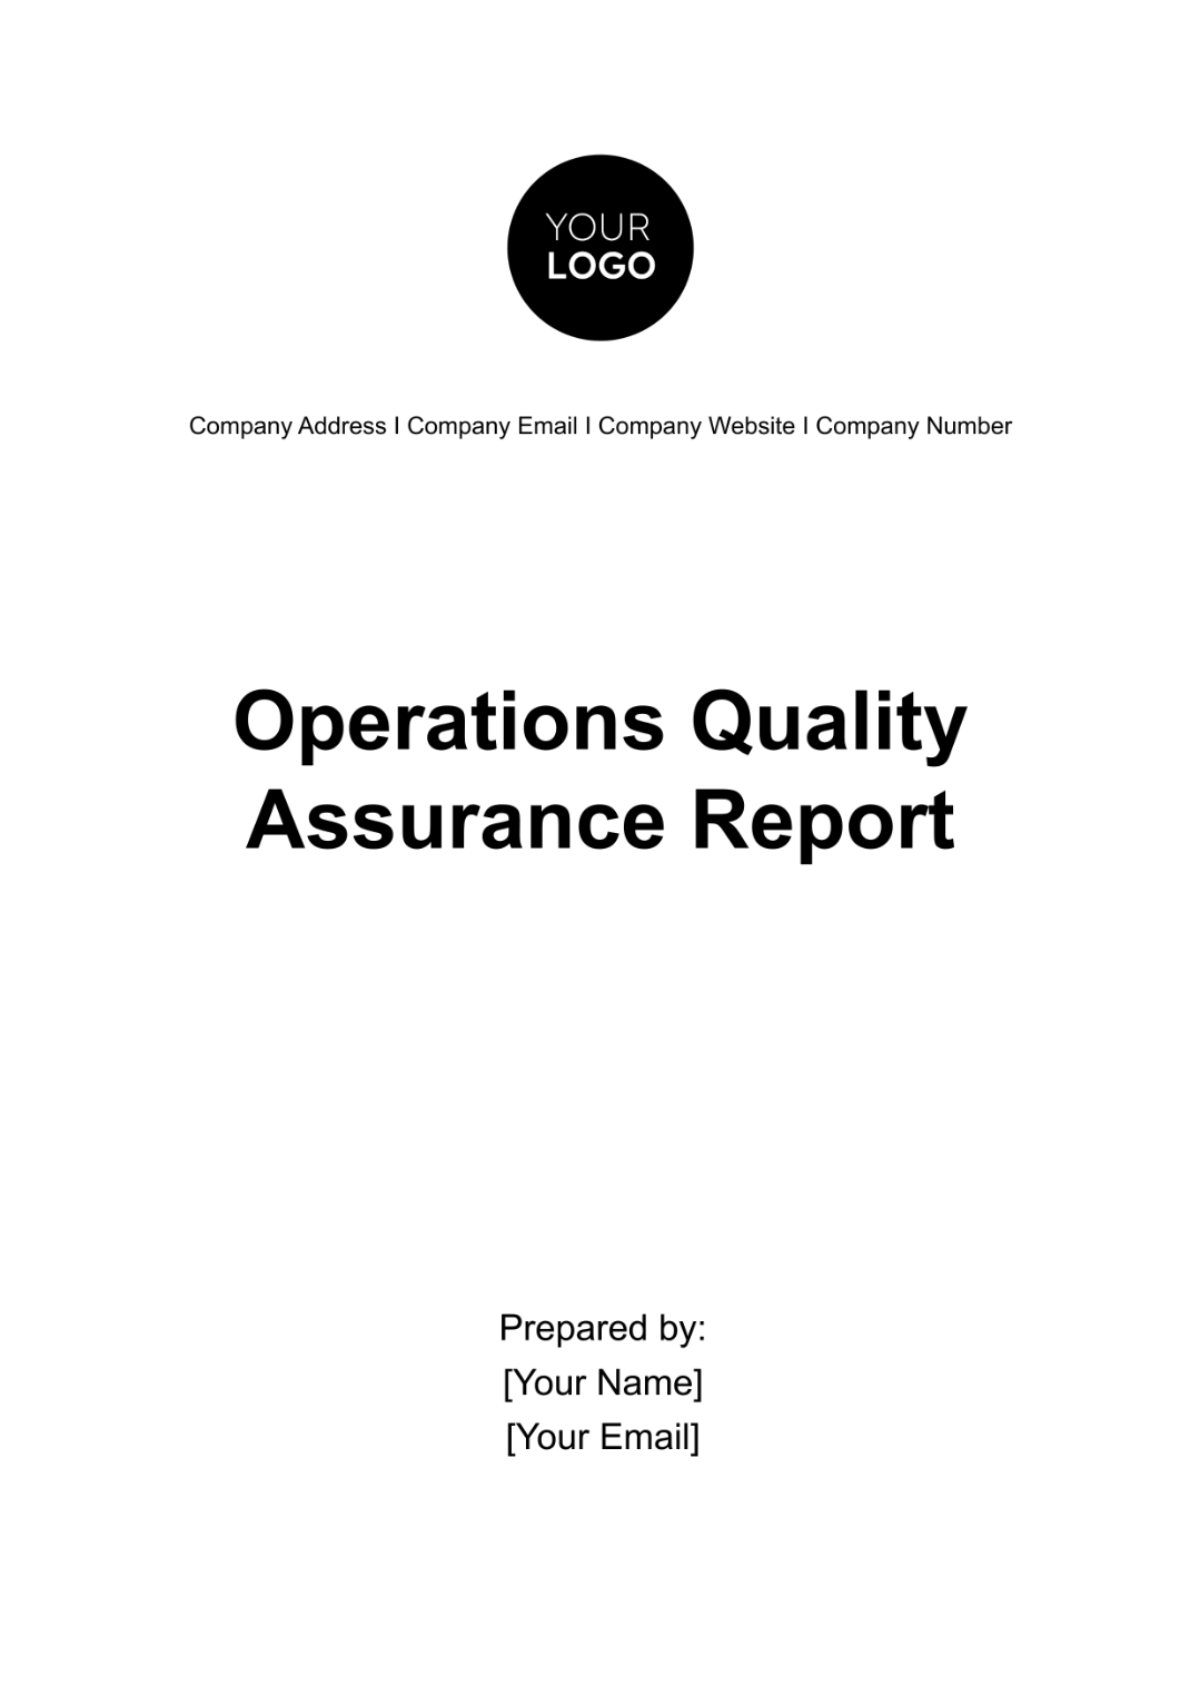 Operations Quality Assurance Report Template